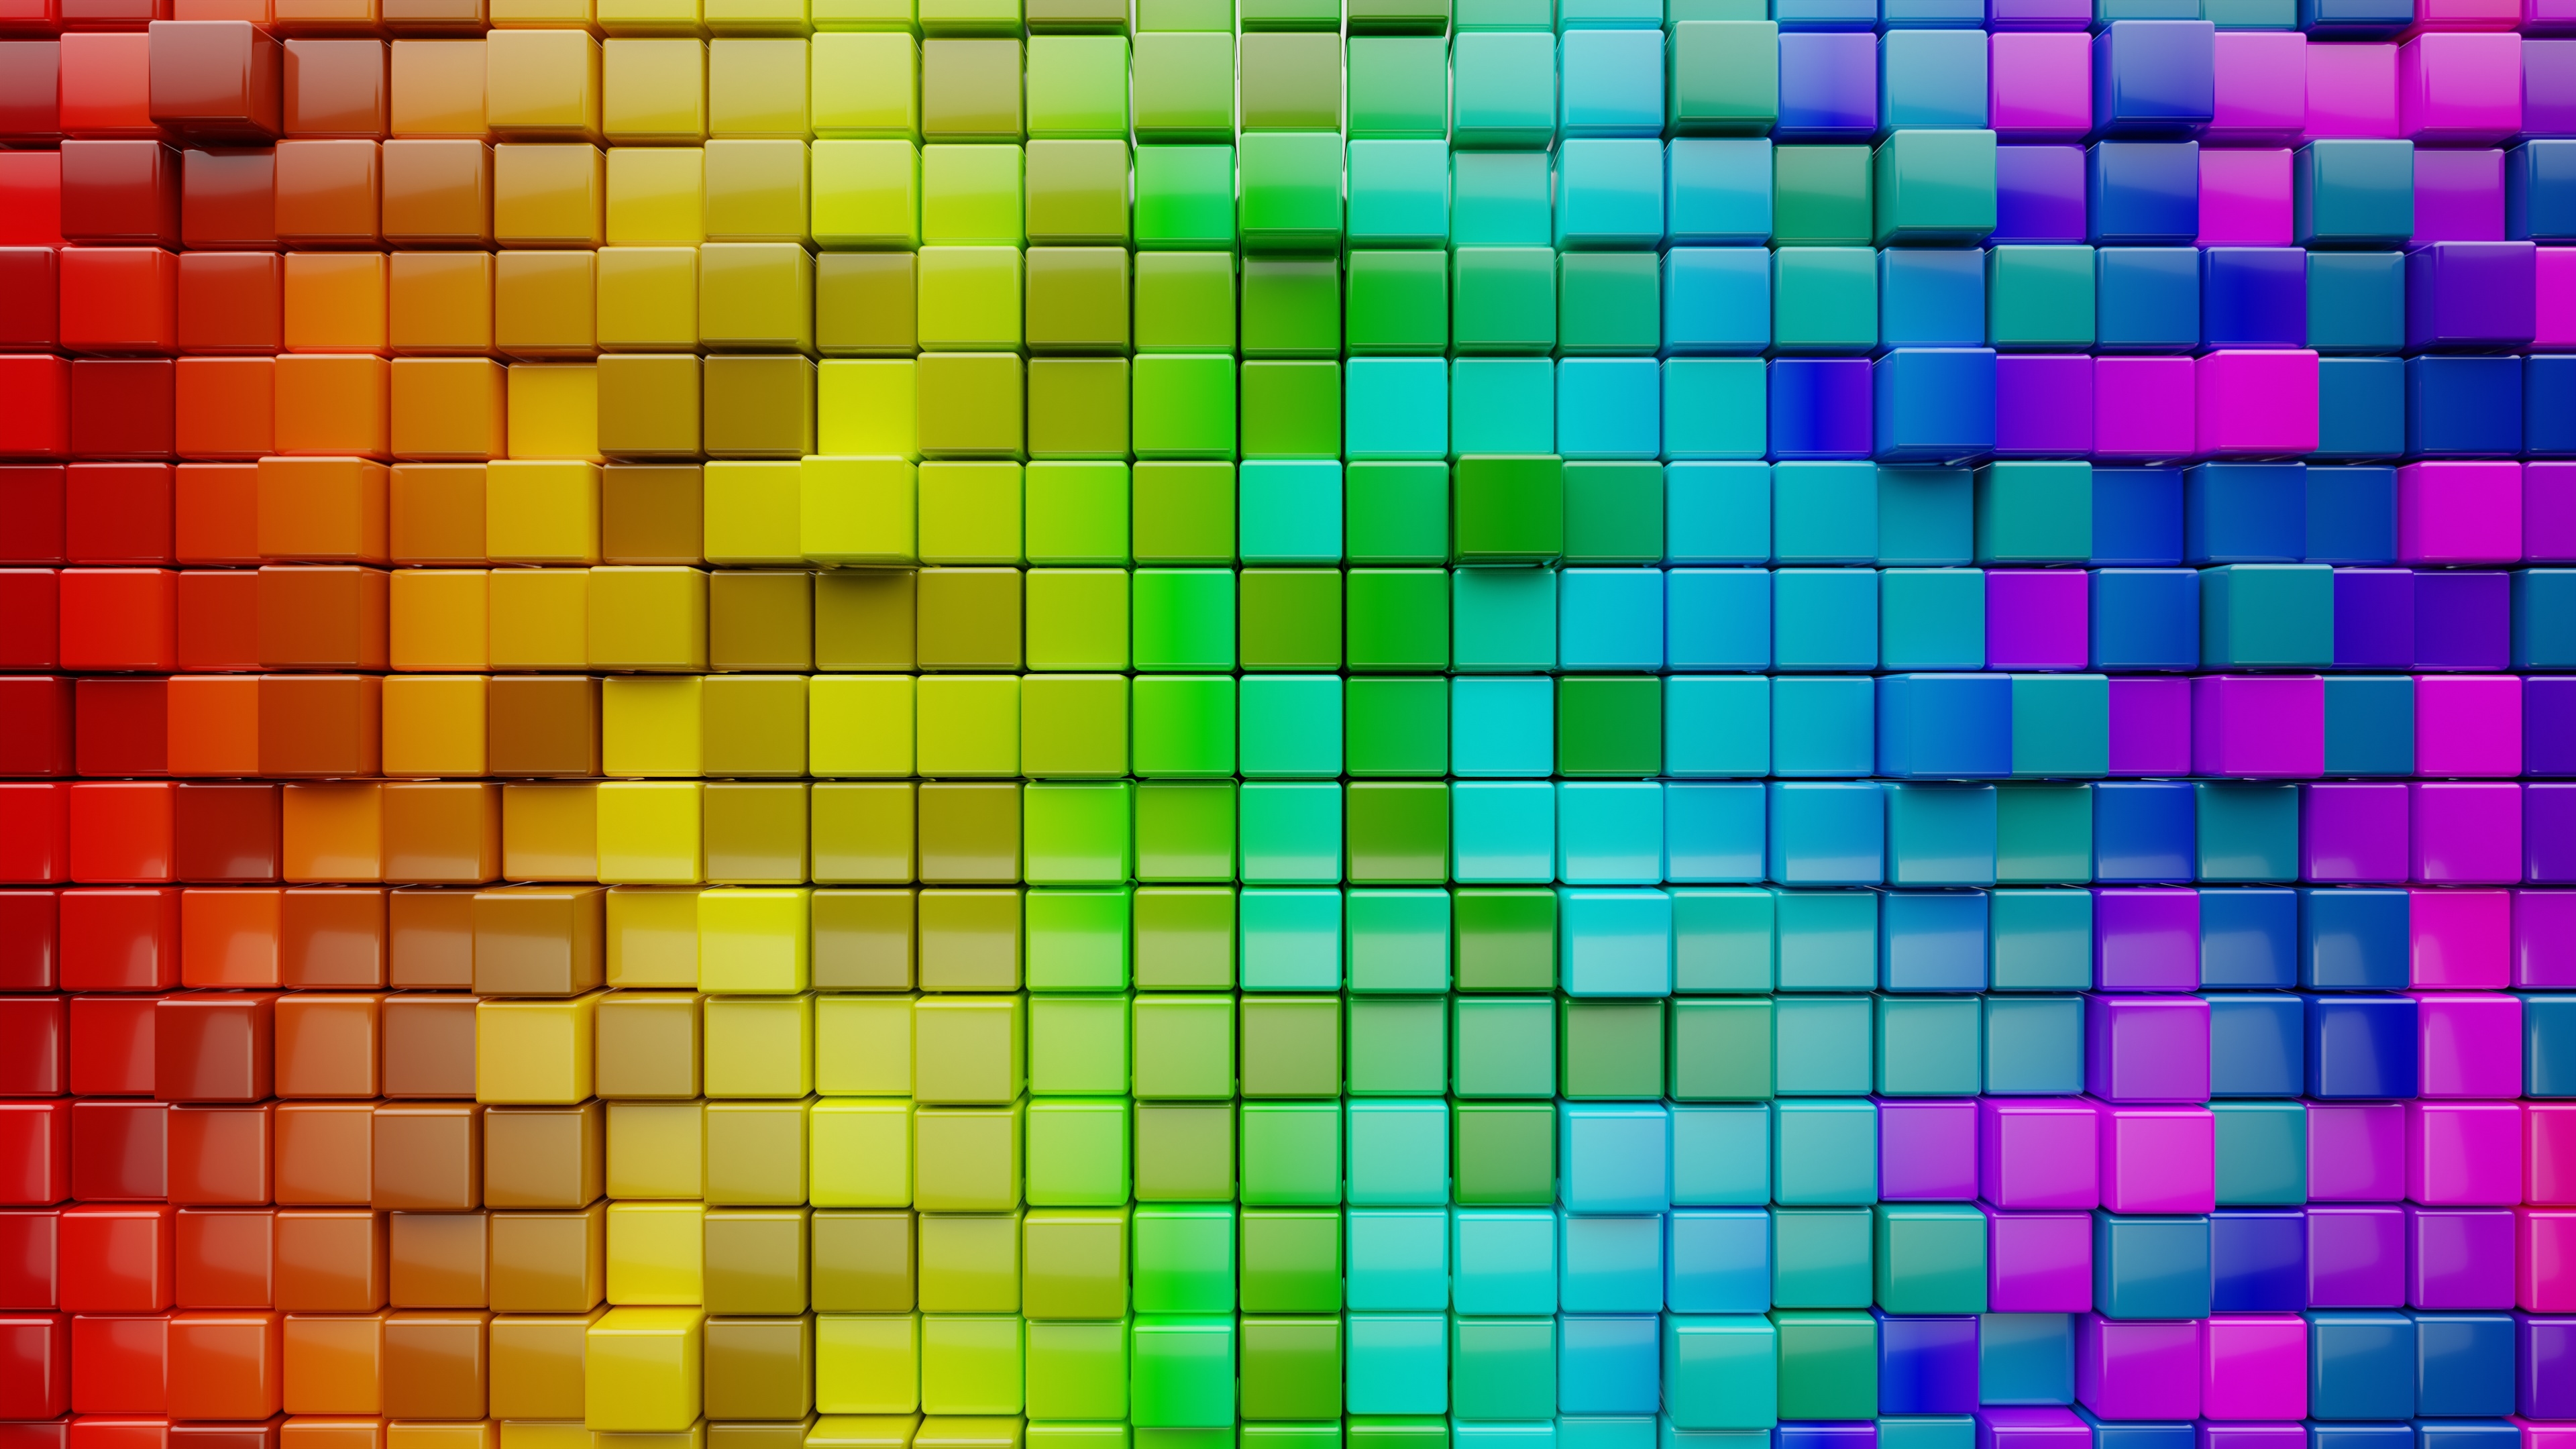 1920x10802019410 Colorful Cube Pattern 1920x10802019410 Resolution Wallpaper,  HD Artist 4K Wallpapers, Images, Photos and Background - Wallpapers Den